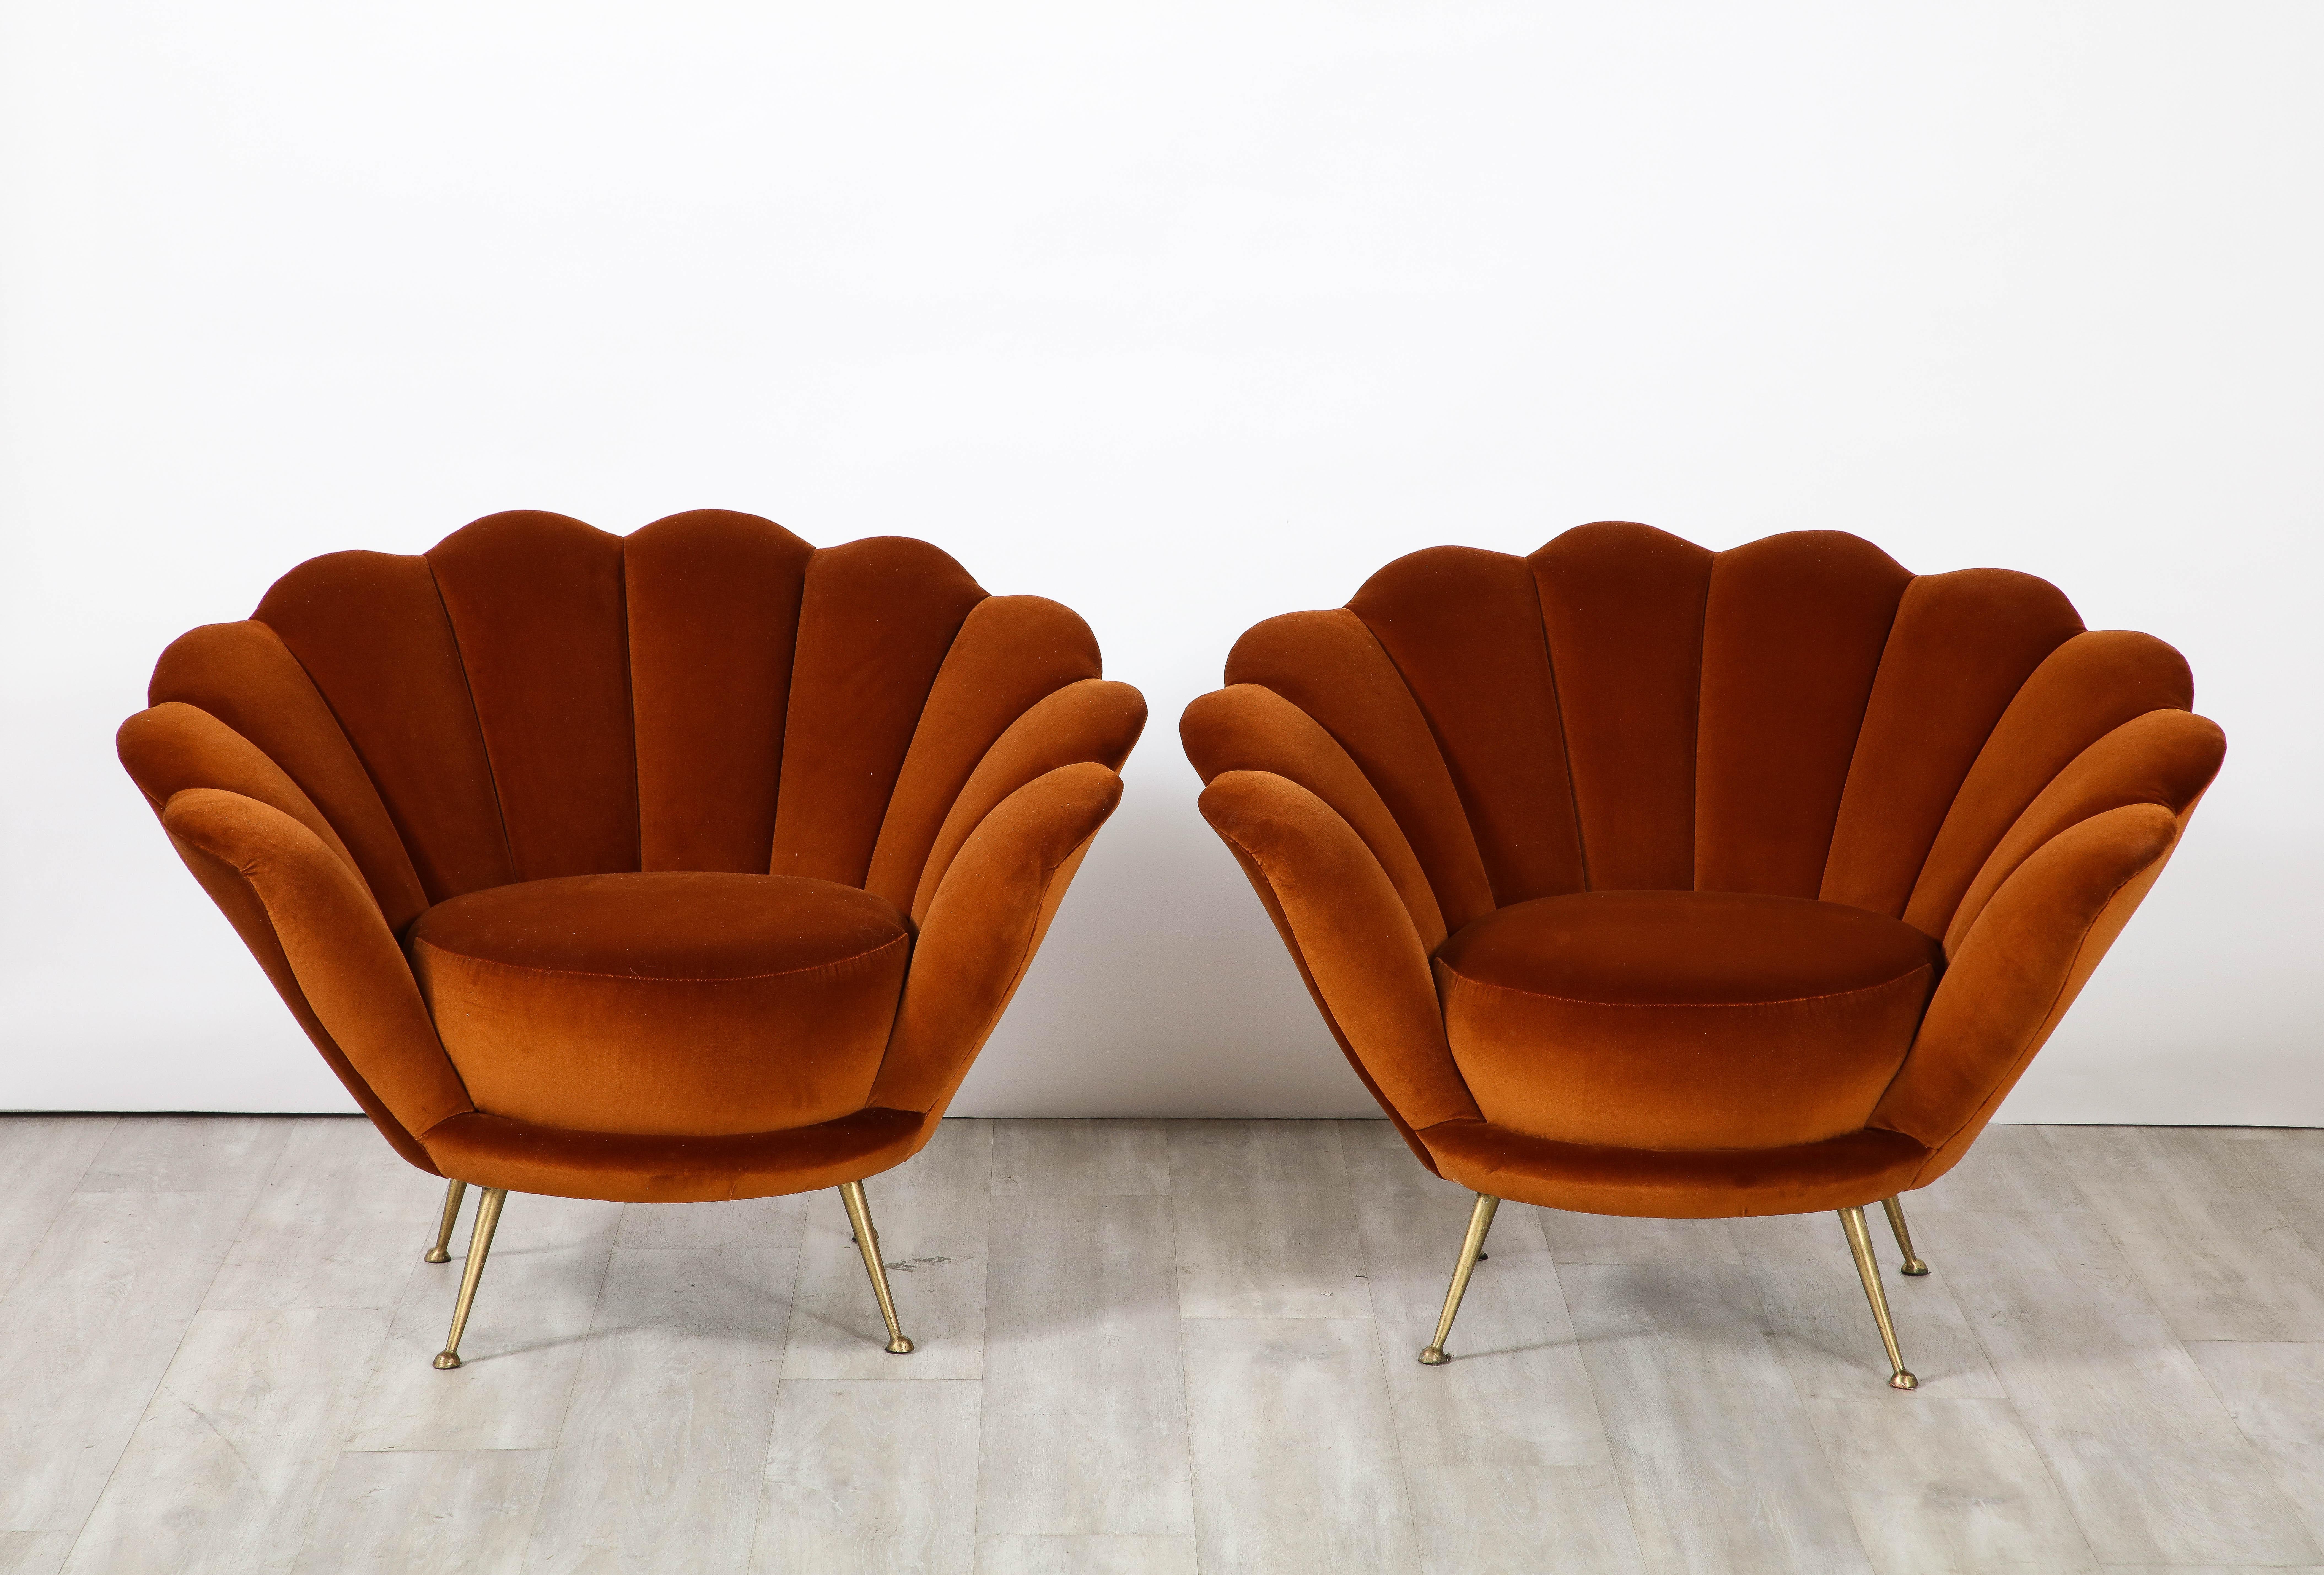 A decadently designed pair of Italian 1950's lounge chairs with a scalloped or petal shaped form. These classic and exquisite lounge chairs have been fully restored and newly reupholstered in a luxurious and rich cotton apricot colored velvet. The